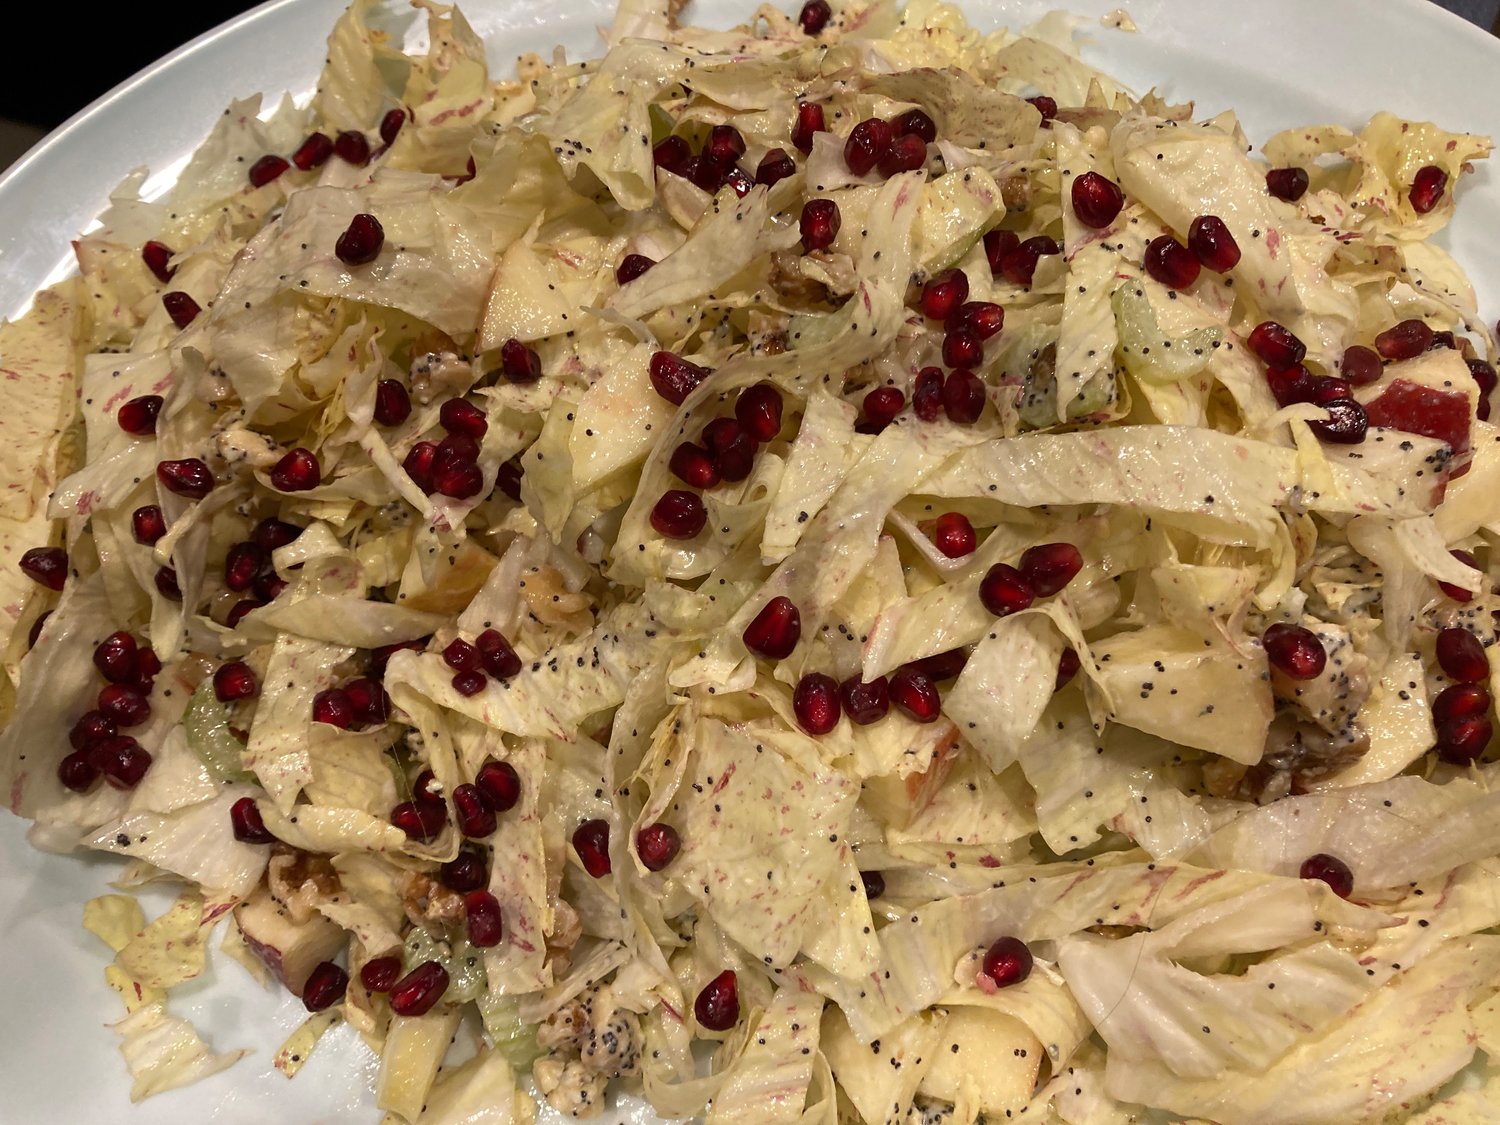 Refrigerator salad topped with pomegranate seeds